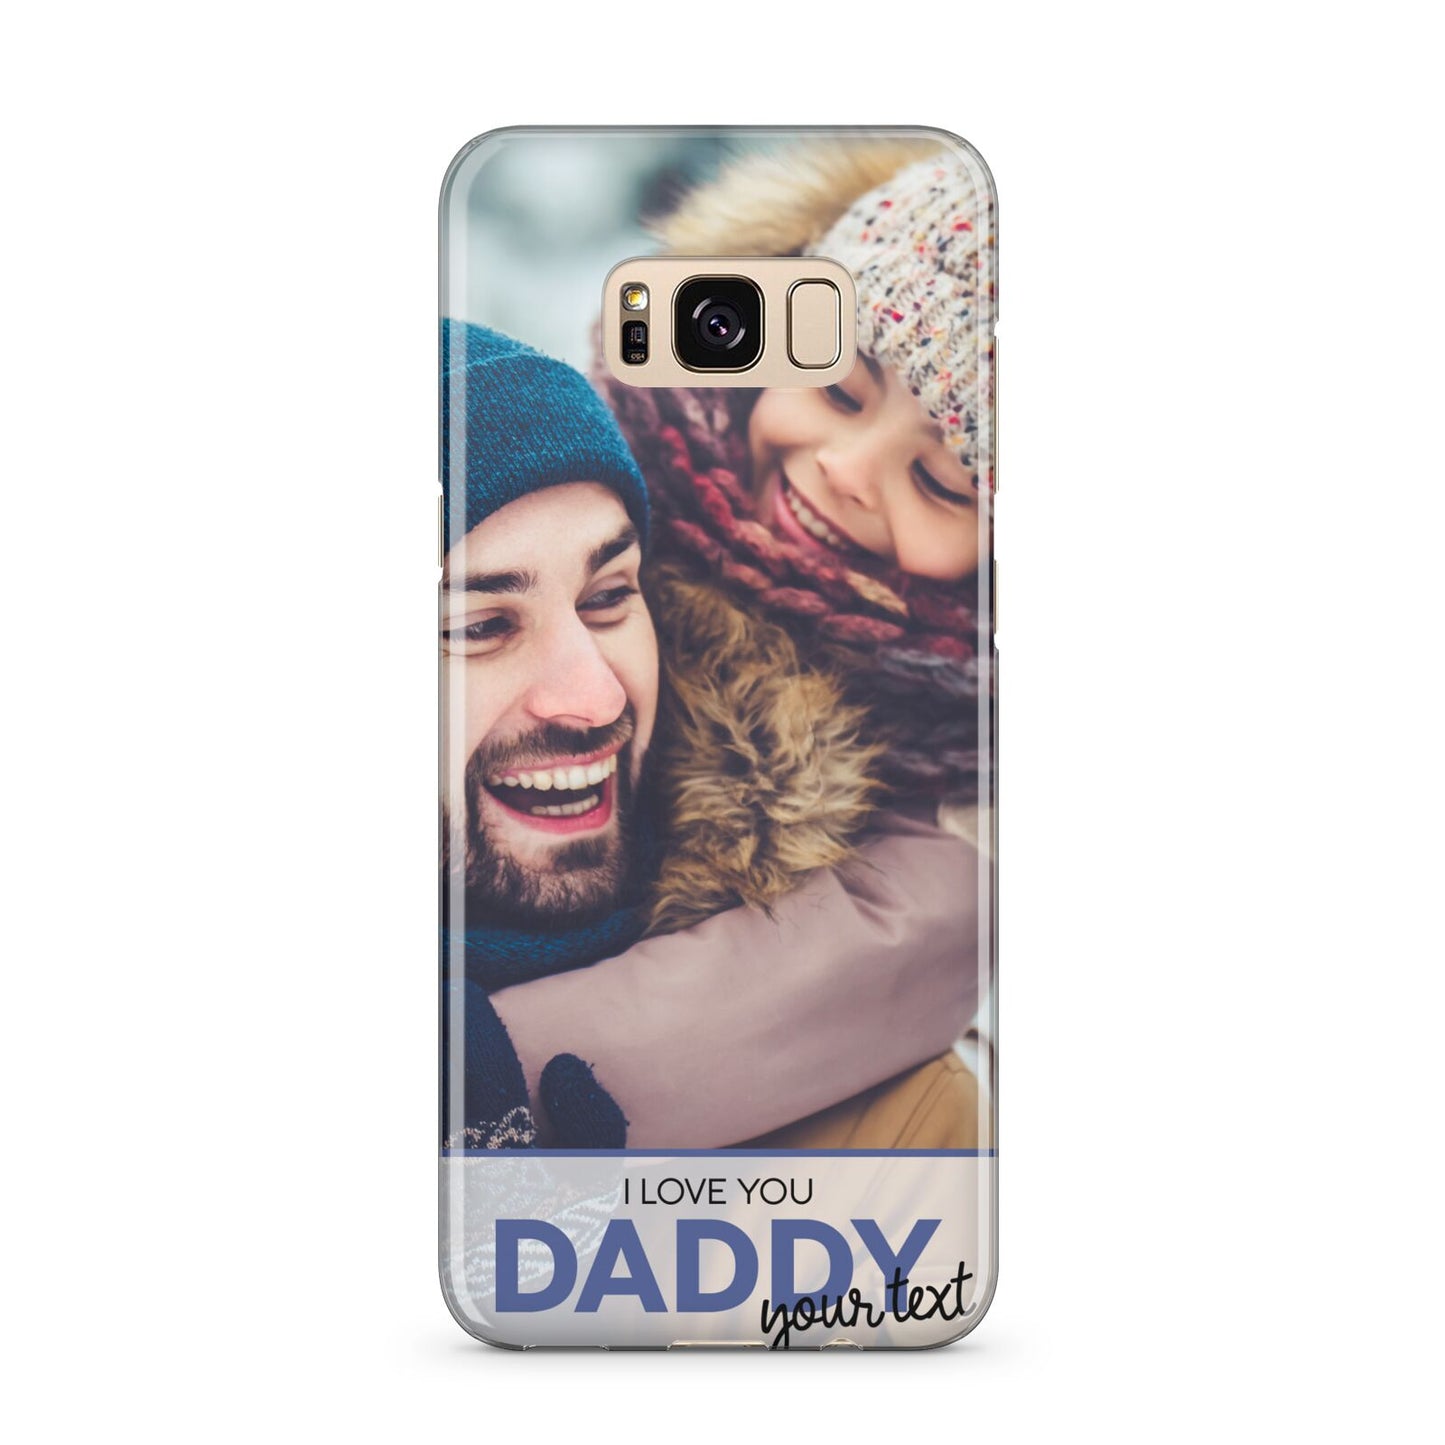 I Love You Daddy Personalised Photo Upload and Name Samsung Galaxy S8 Plus Case